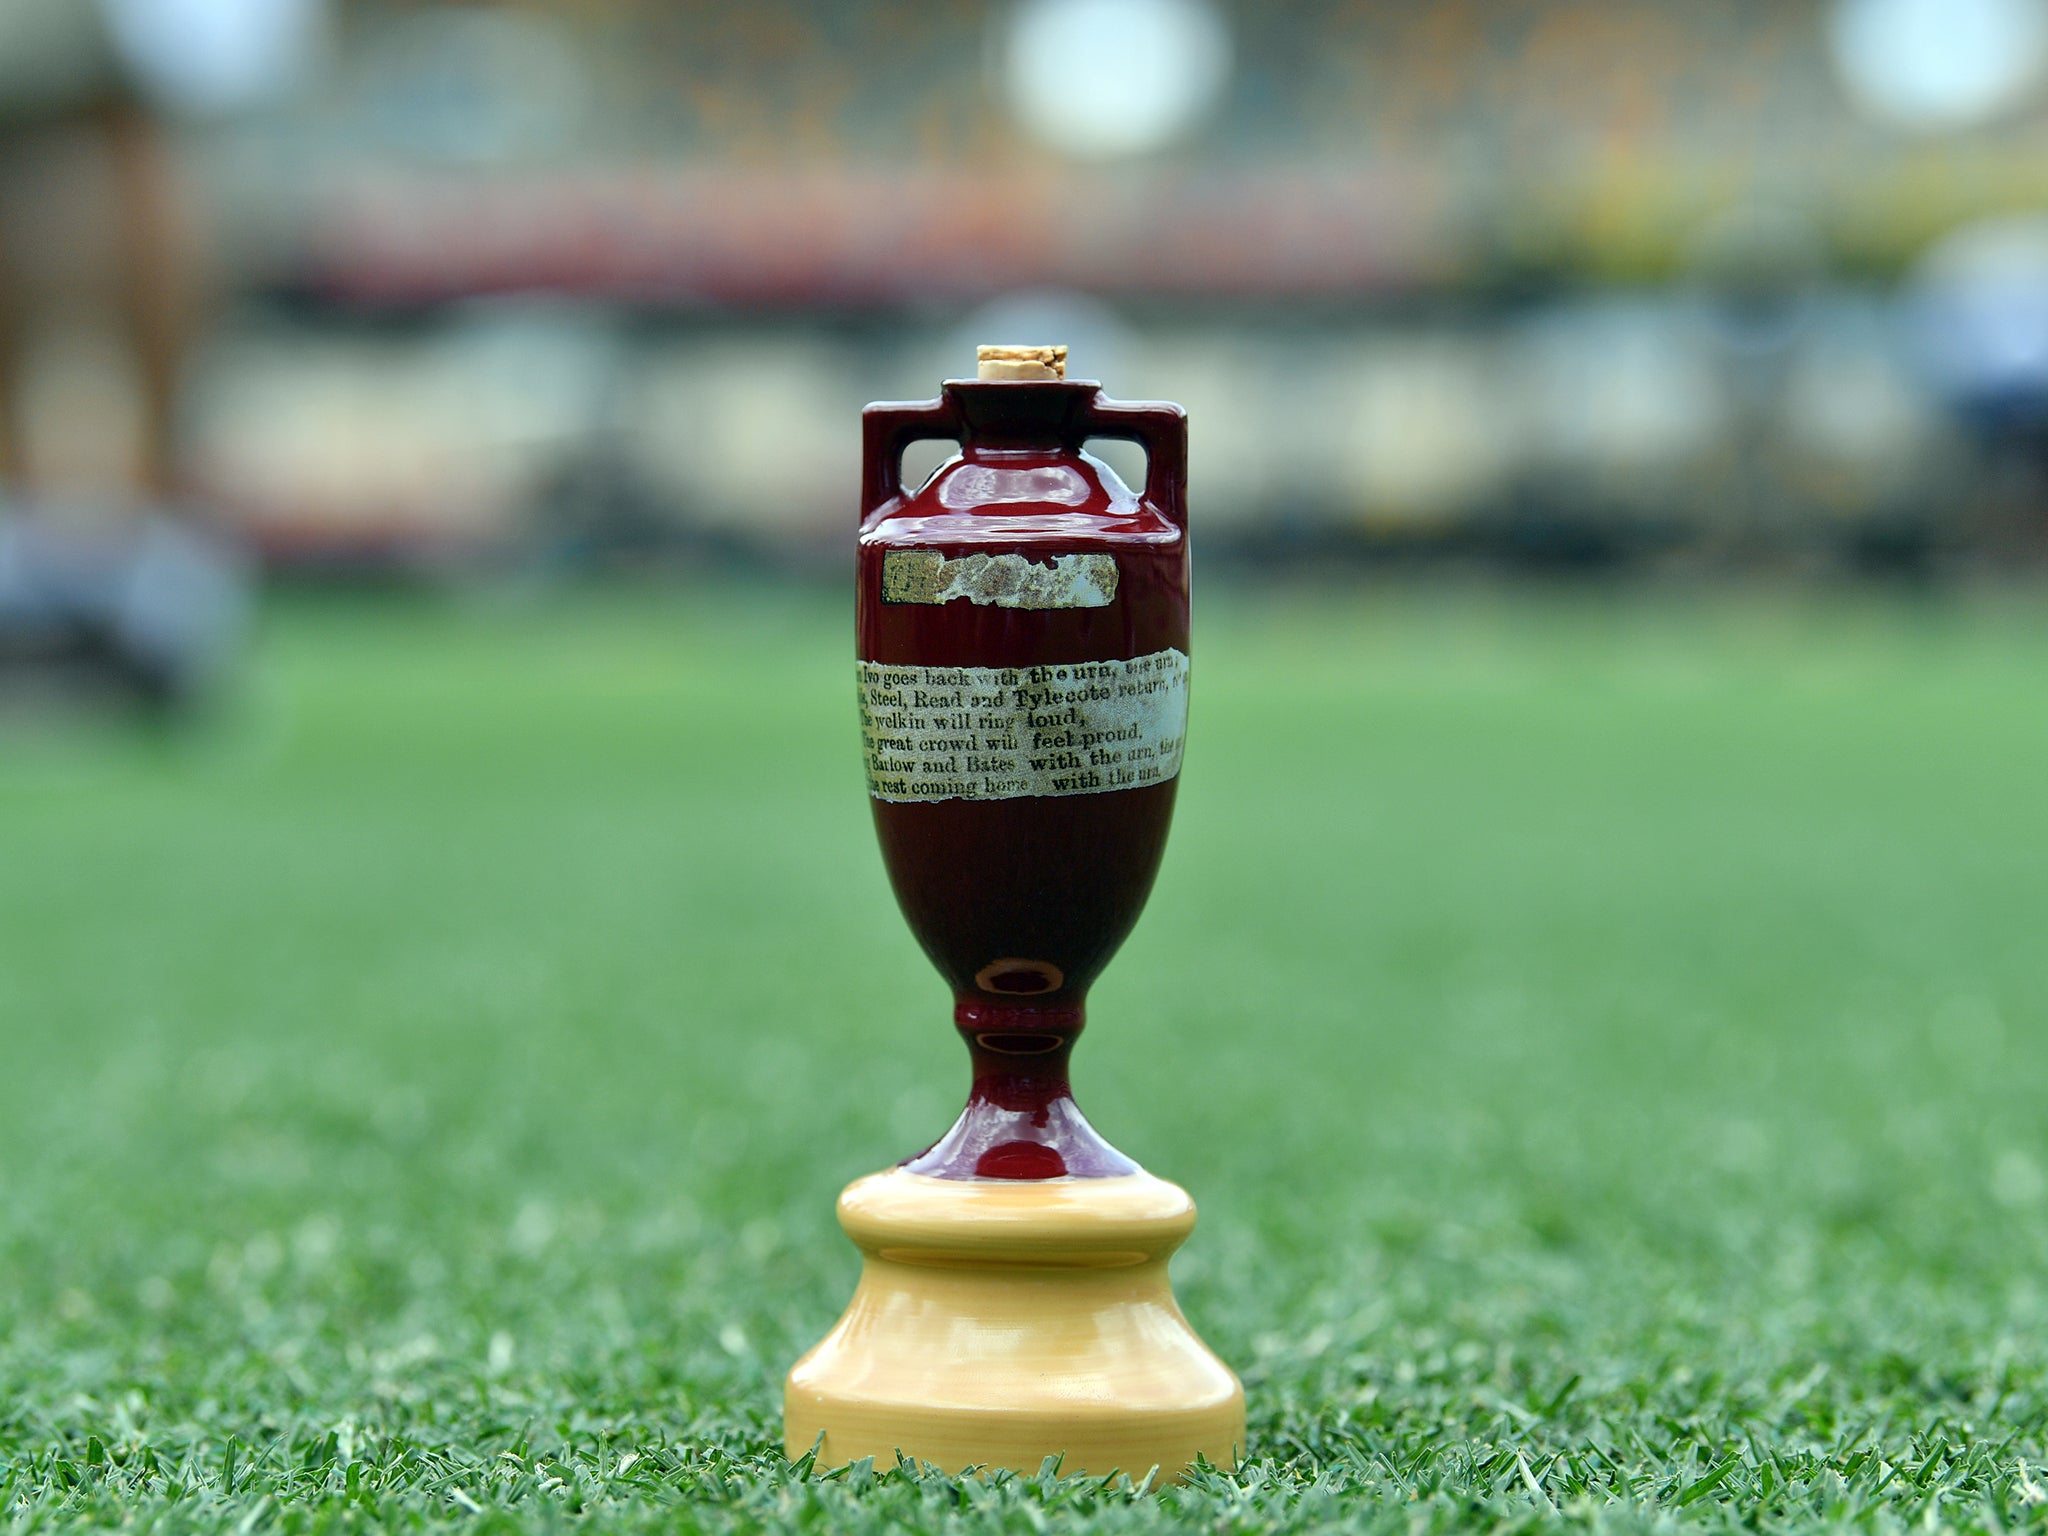 The Ashes starts at midnight on Thursday morning as England and Australia renew their rivalry